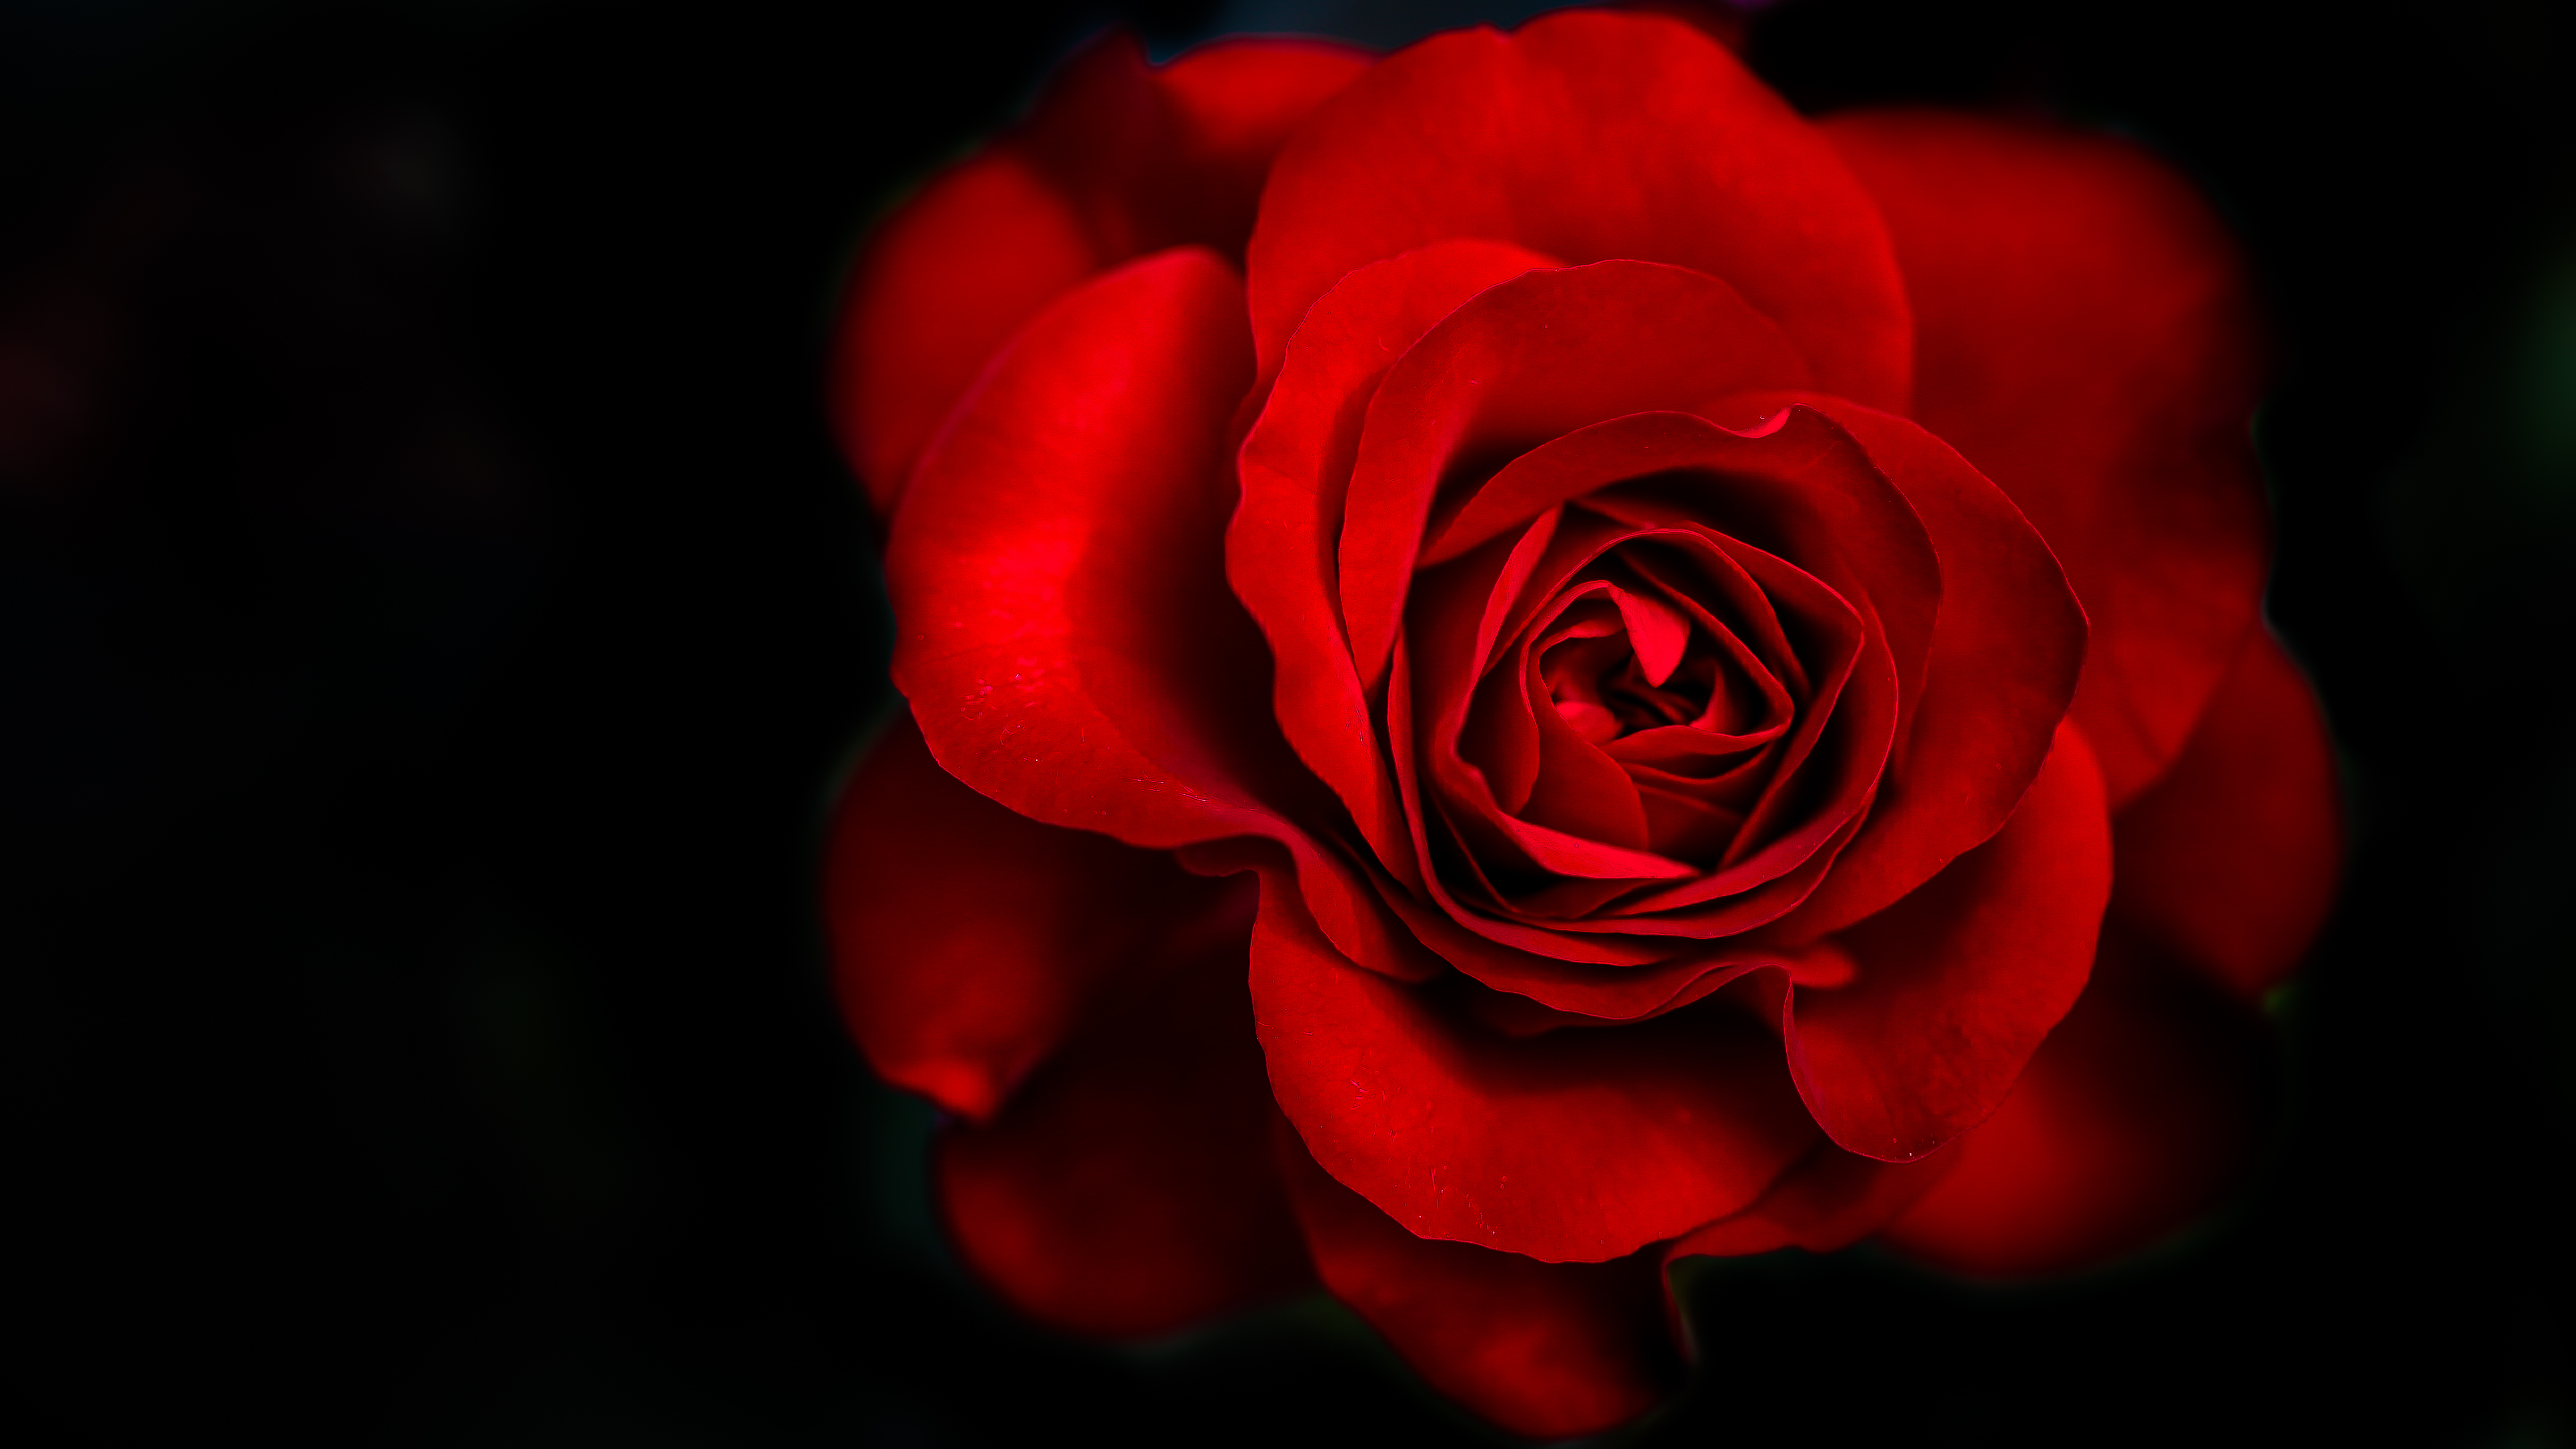 Red Rose 5k Retina Ultra HD Wallpaper and Background Image ...